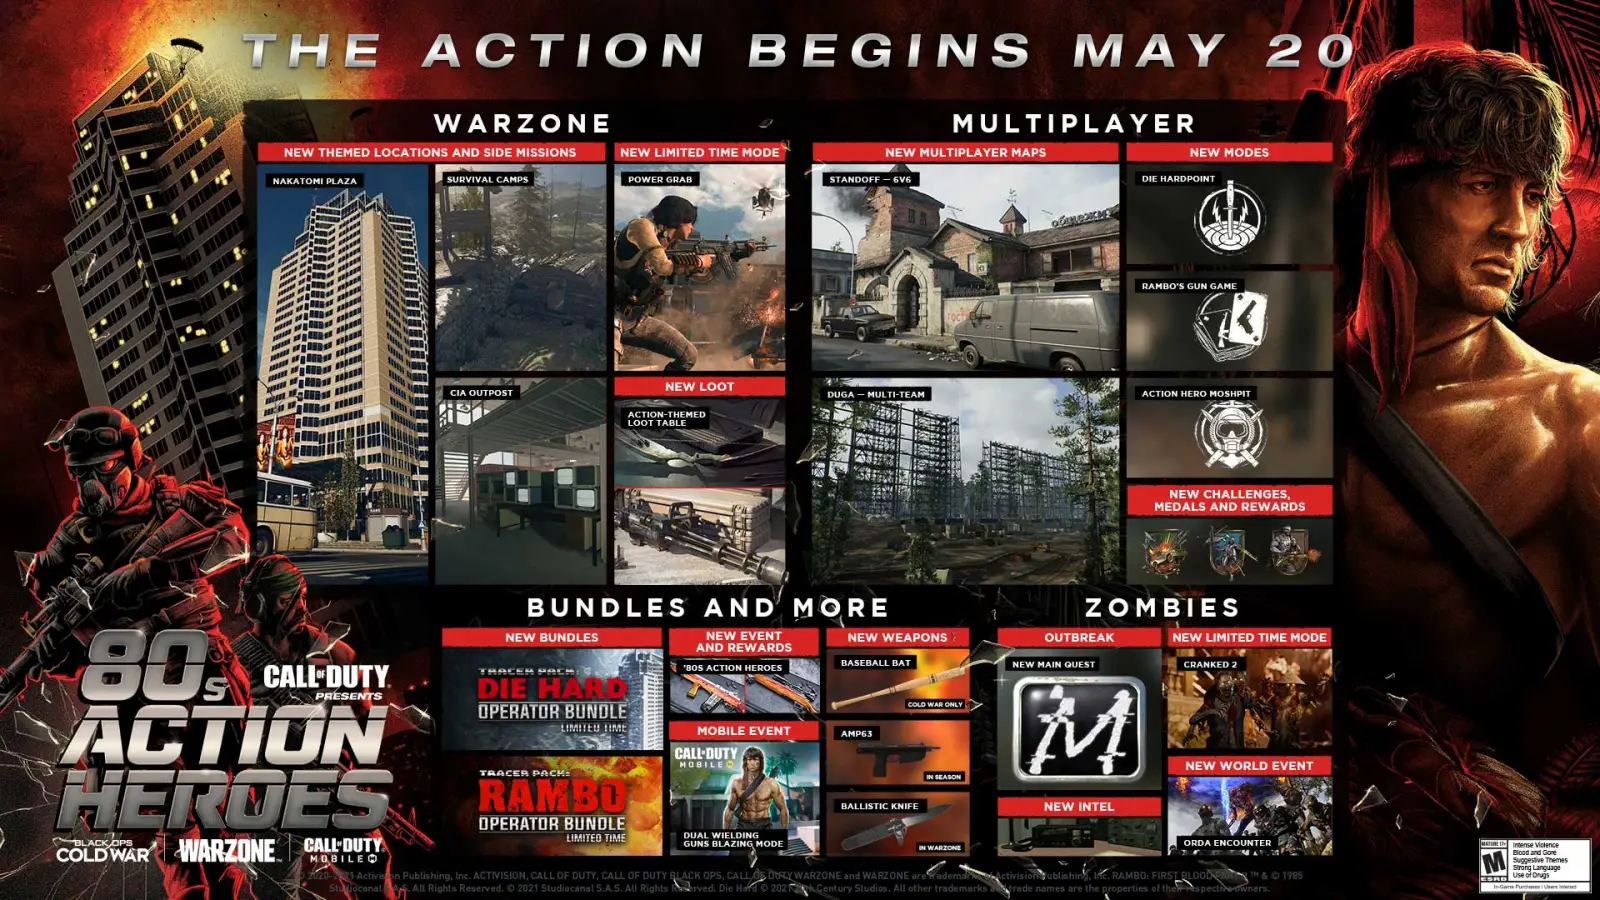 New Content Creator Package from the Previous Rambo Event - photo №81484